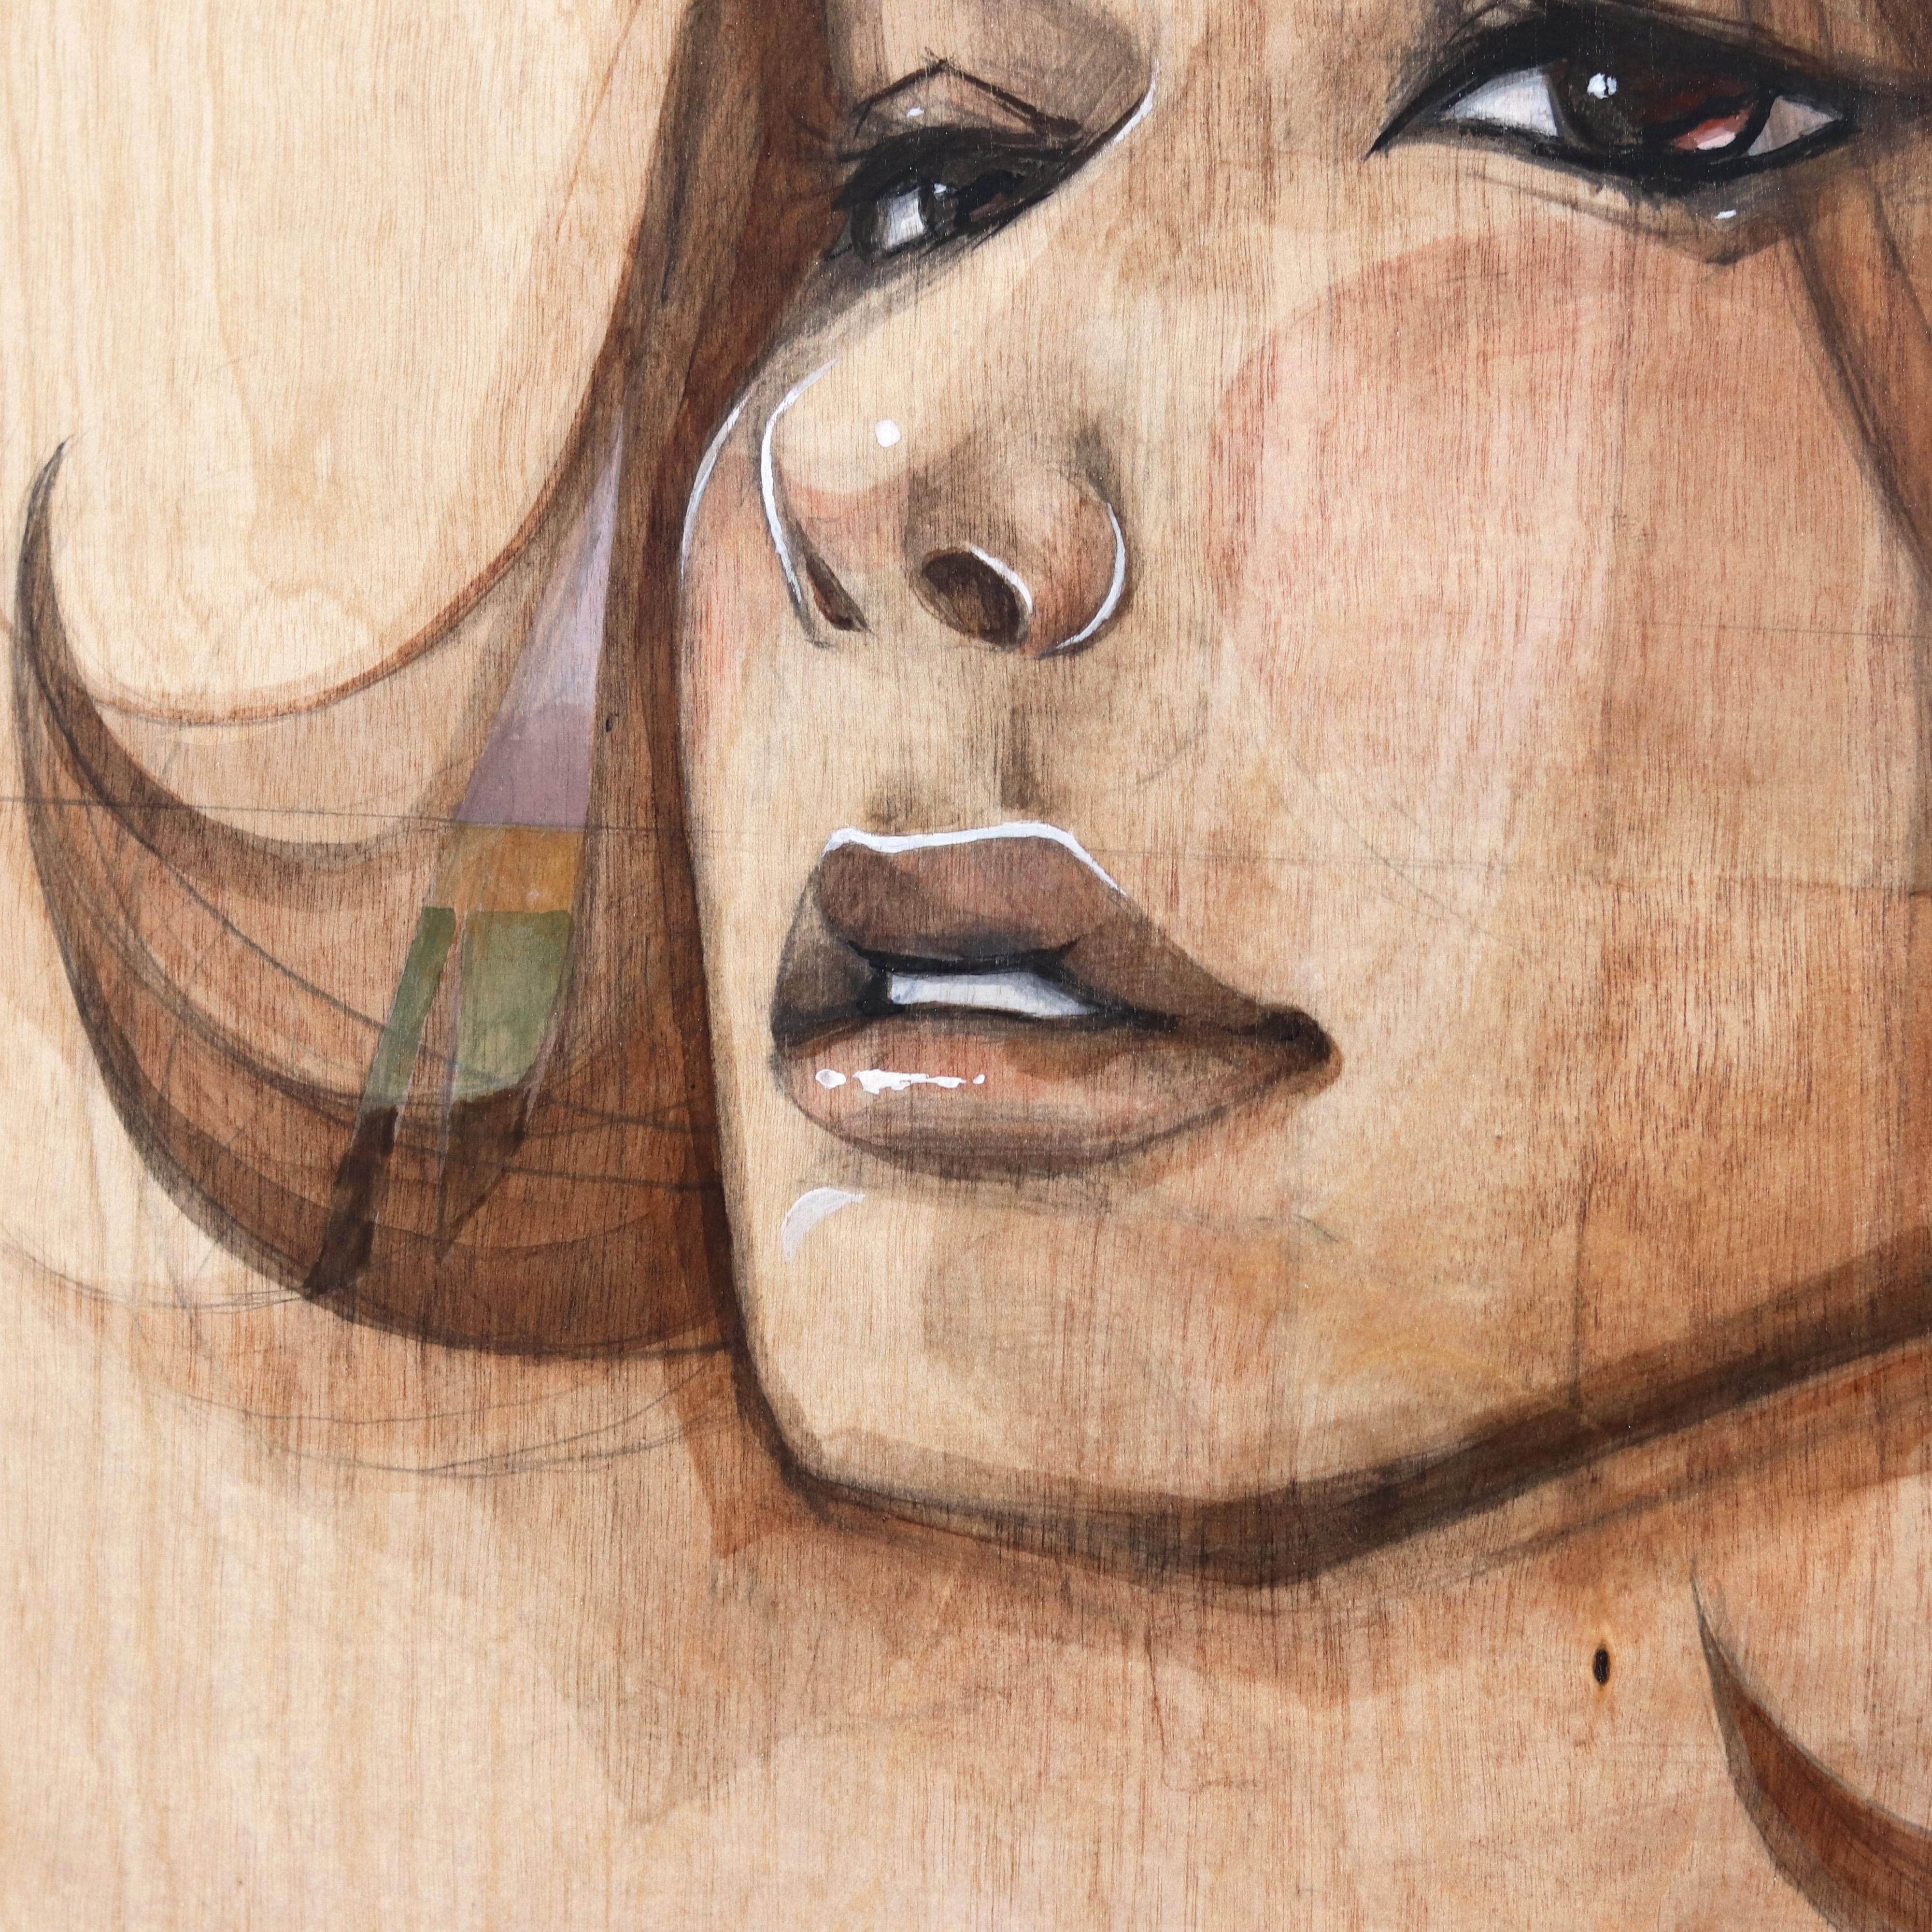 Eddy Lee’s figurative surrealist portrait paintings on exposed wood depict emotive sirens who evoke a sense of mystery and seductiveness. His original artworks combine geometric elements with innocent women portraits seeking to trigger emotions,